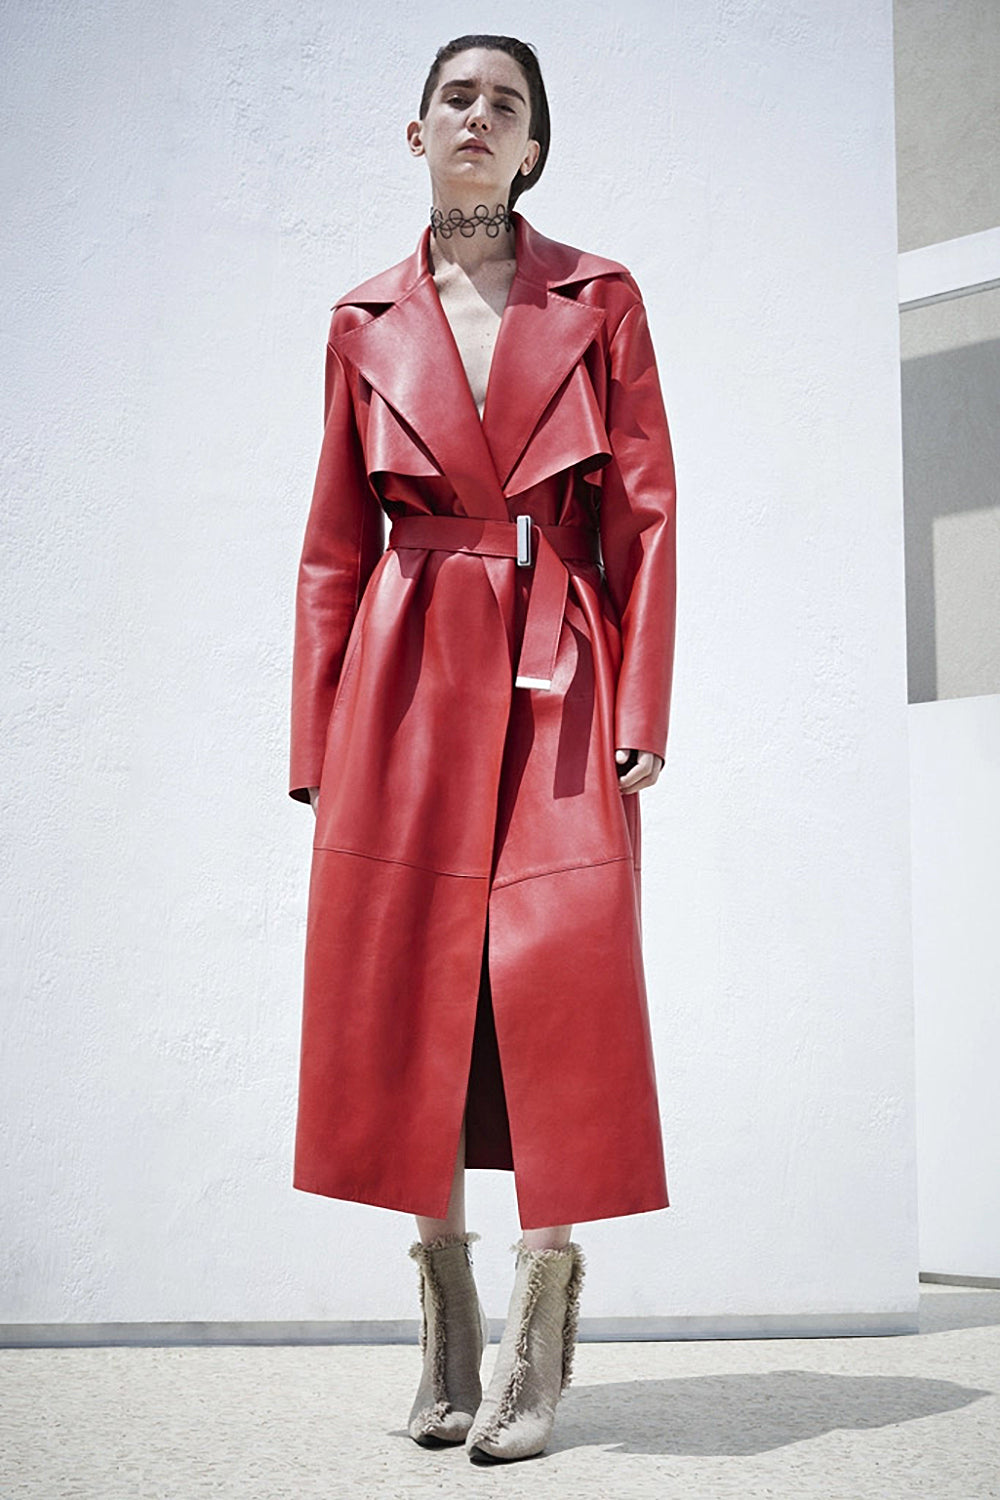 Red Long Leather Trench Belt Lapel Loose PU Coat - IULOVER